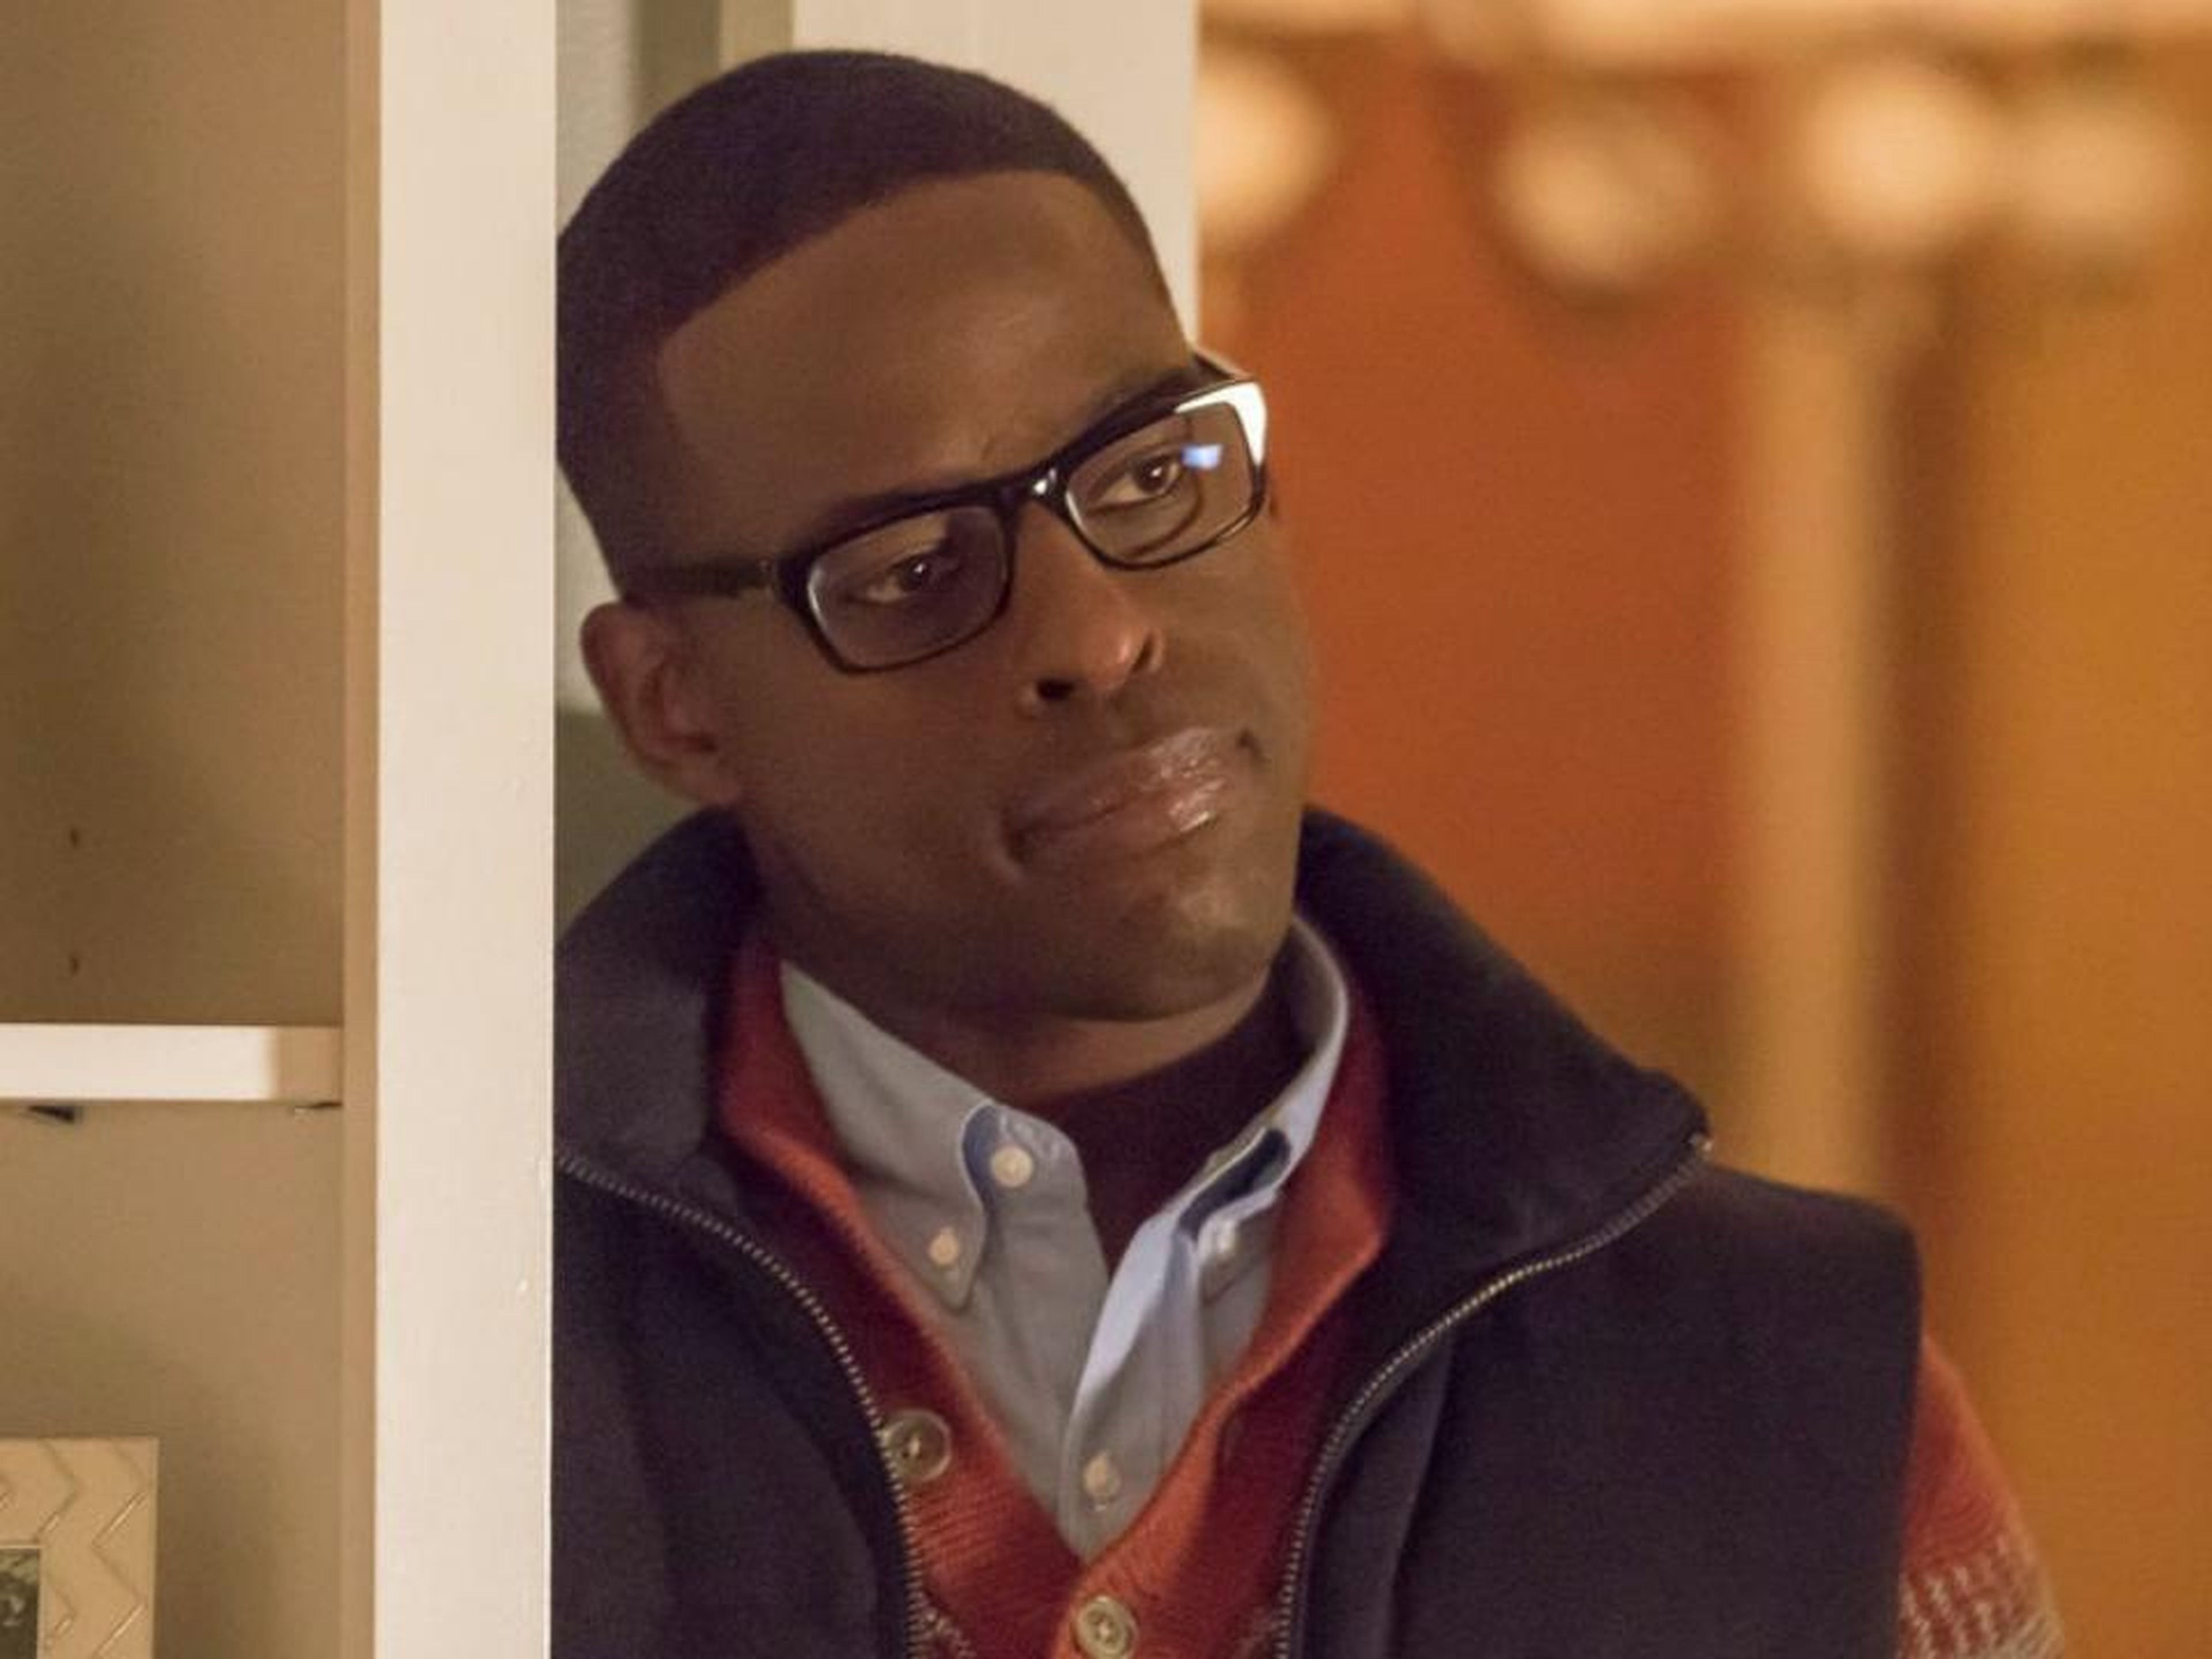 250.000 dólares — Sterling K. Brown, "This Is Us" (NBC)